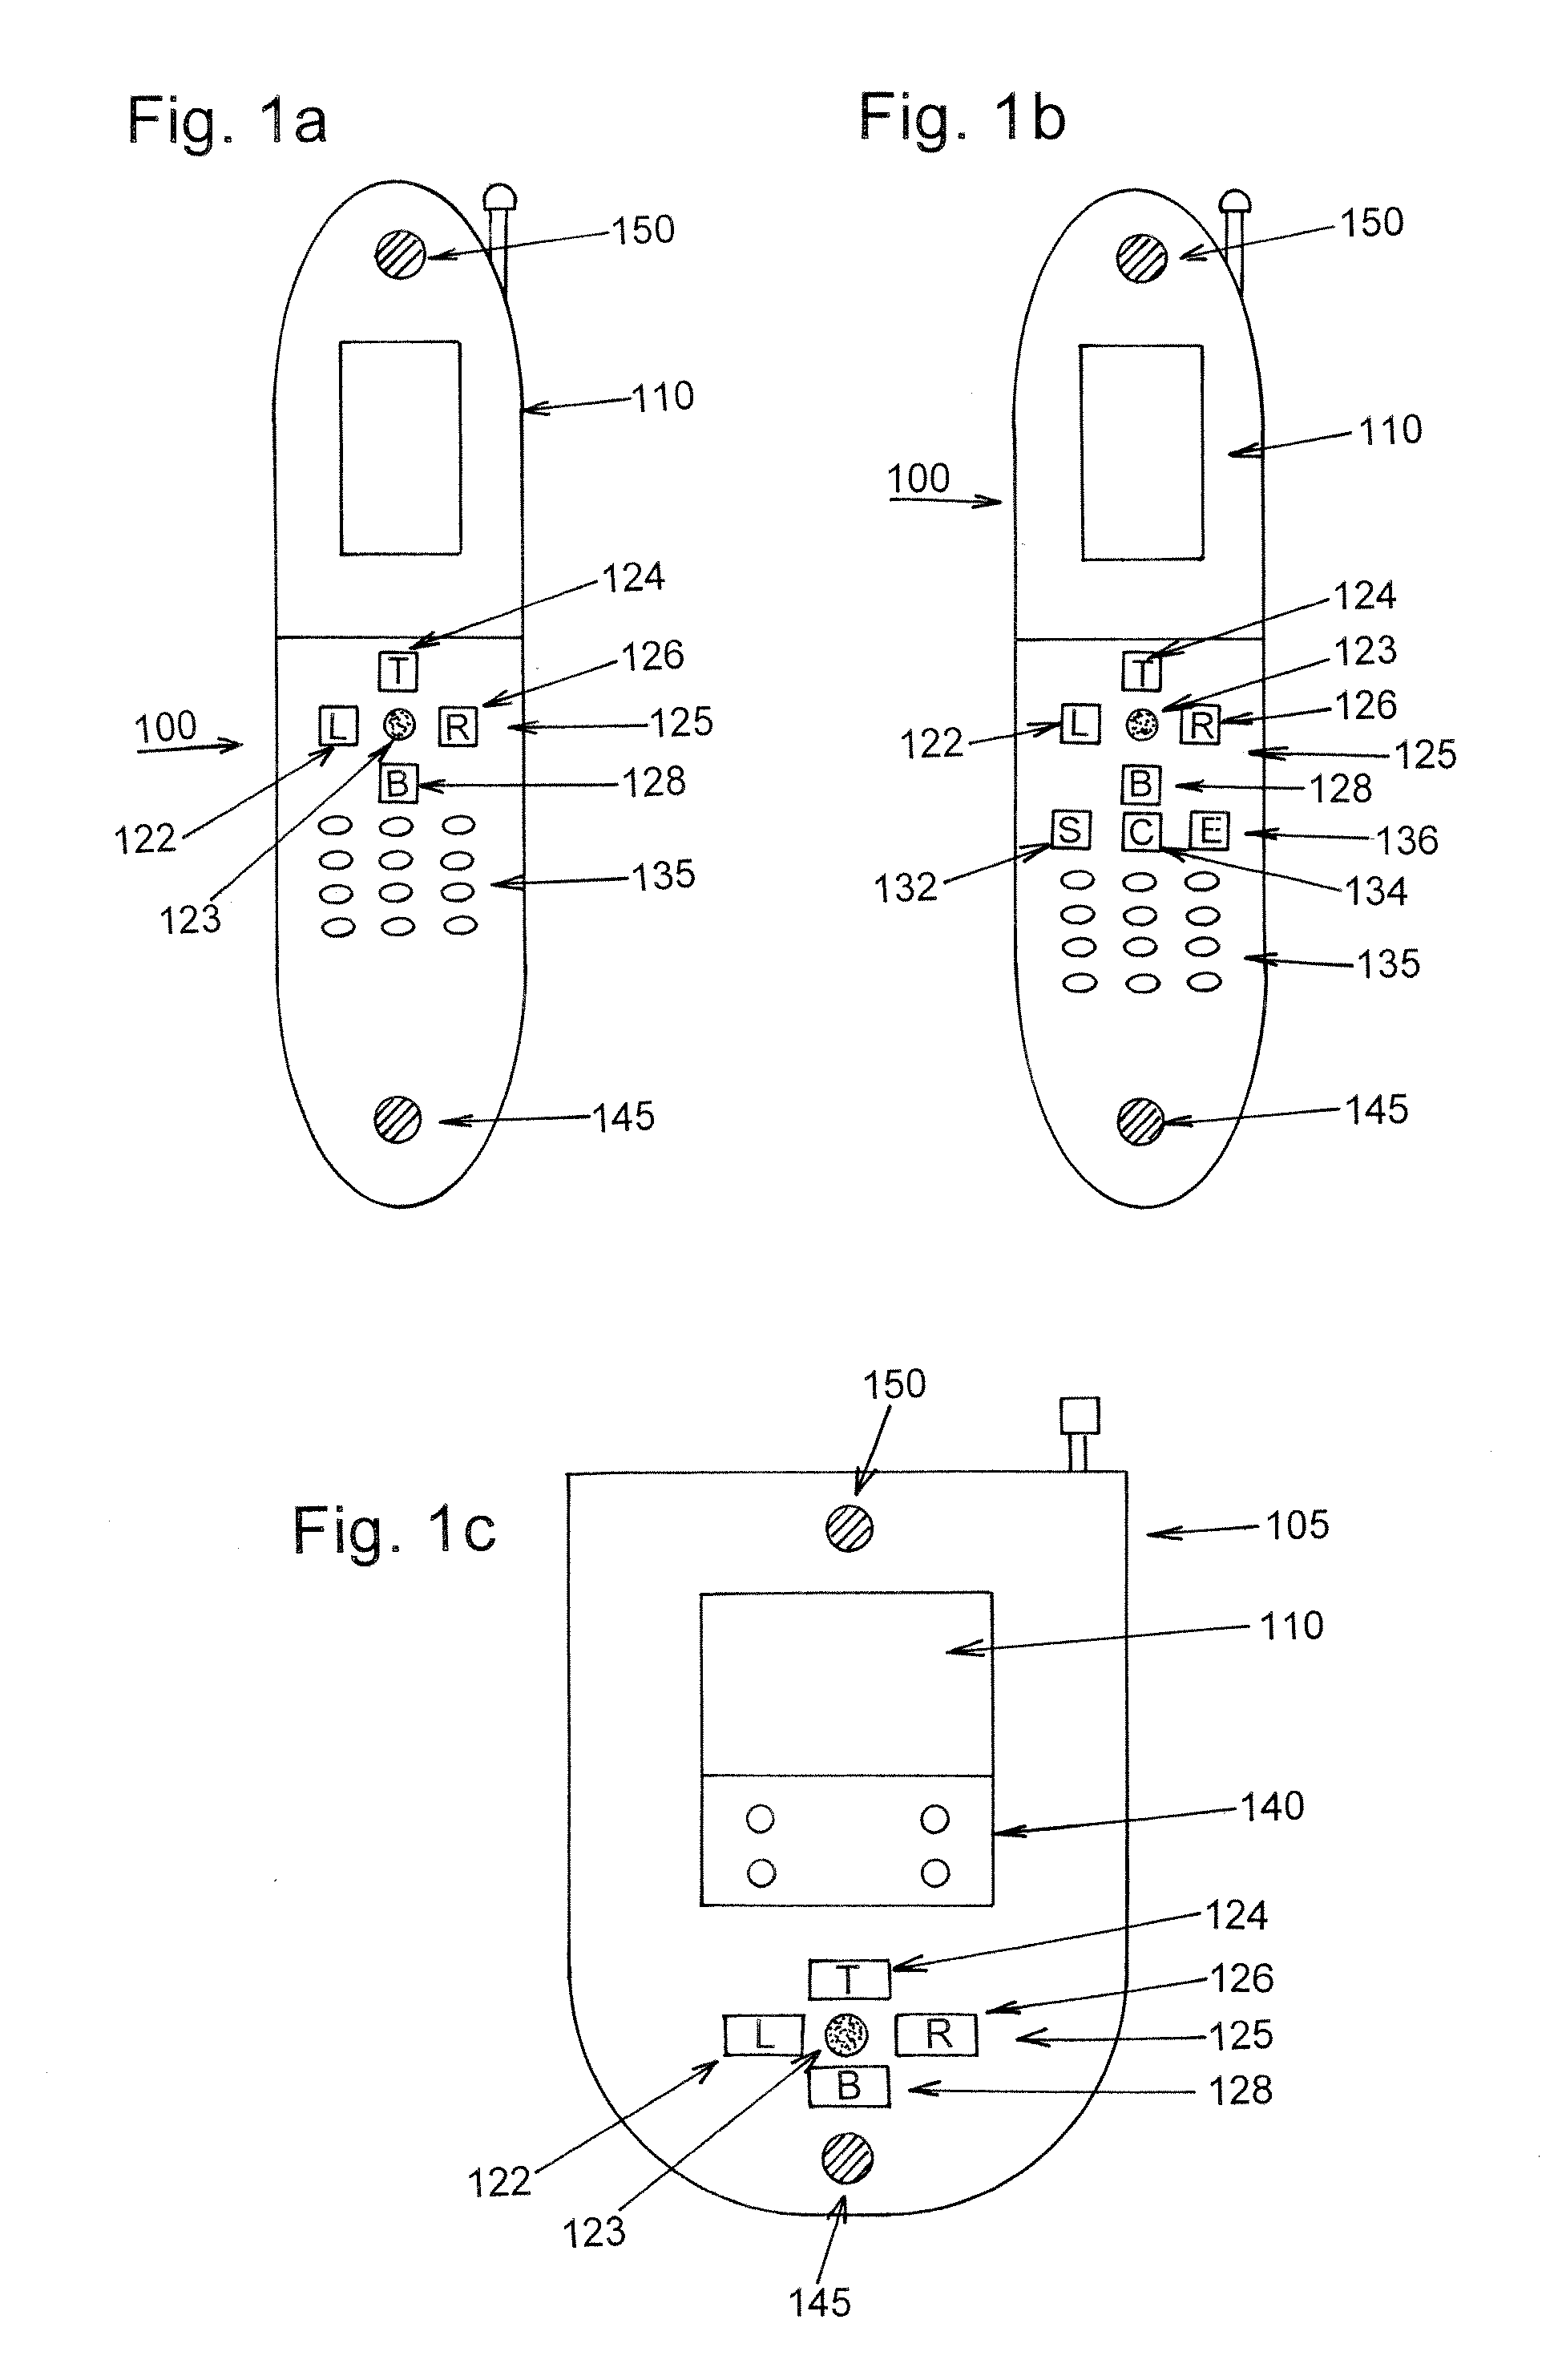 Method and device for providing a multi-level user interface having a dynamic key assignment for cellularly communicative device